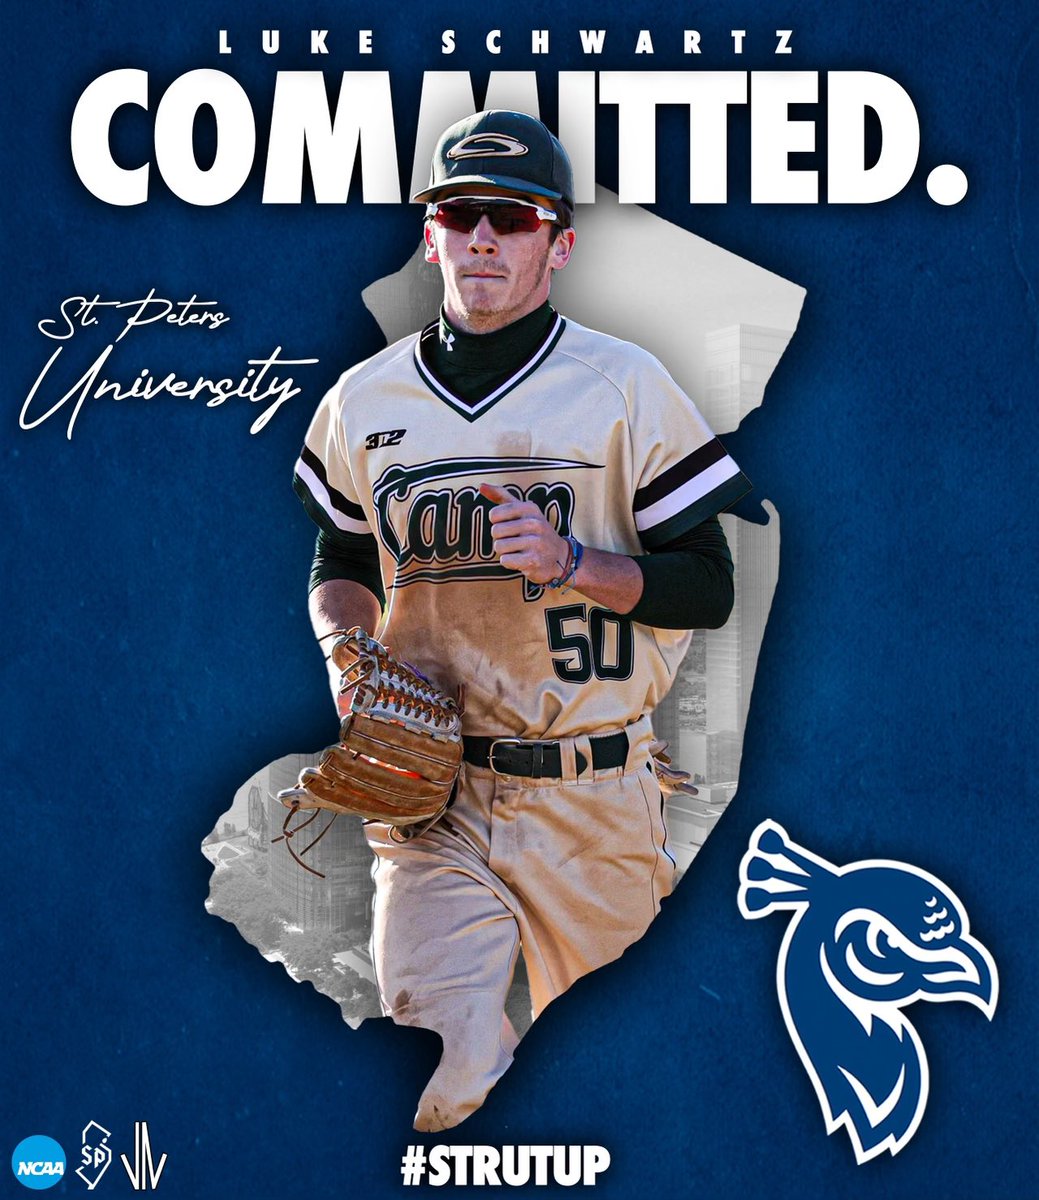 I am excited to announce my commitment to the University of St. Peter’s where I will further my Academic and Athletic abilities. I am also thankful for all of my friends, family and coaches that have believed in me through this journey. #Strutup